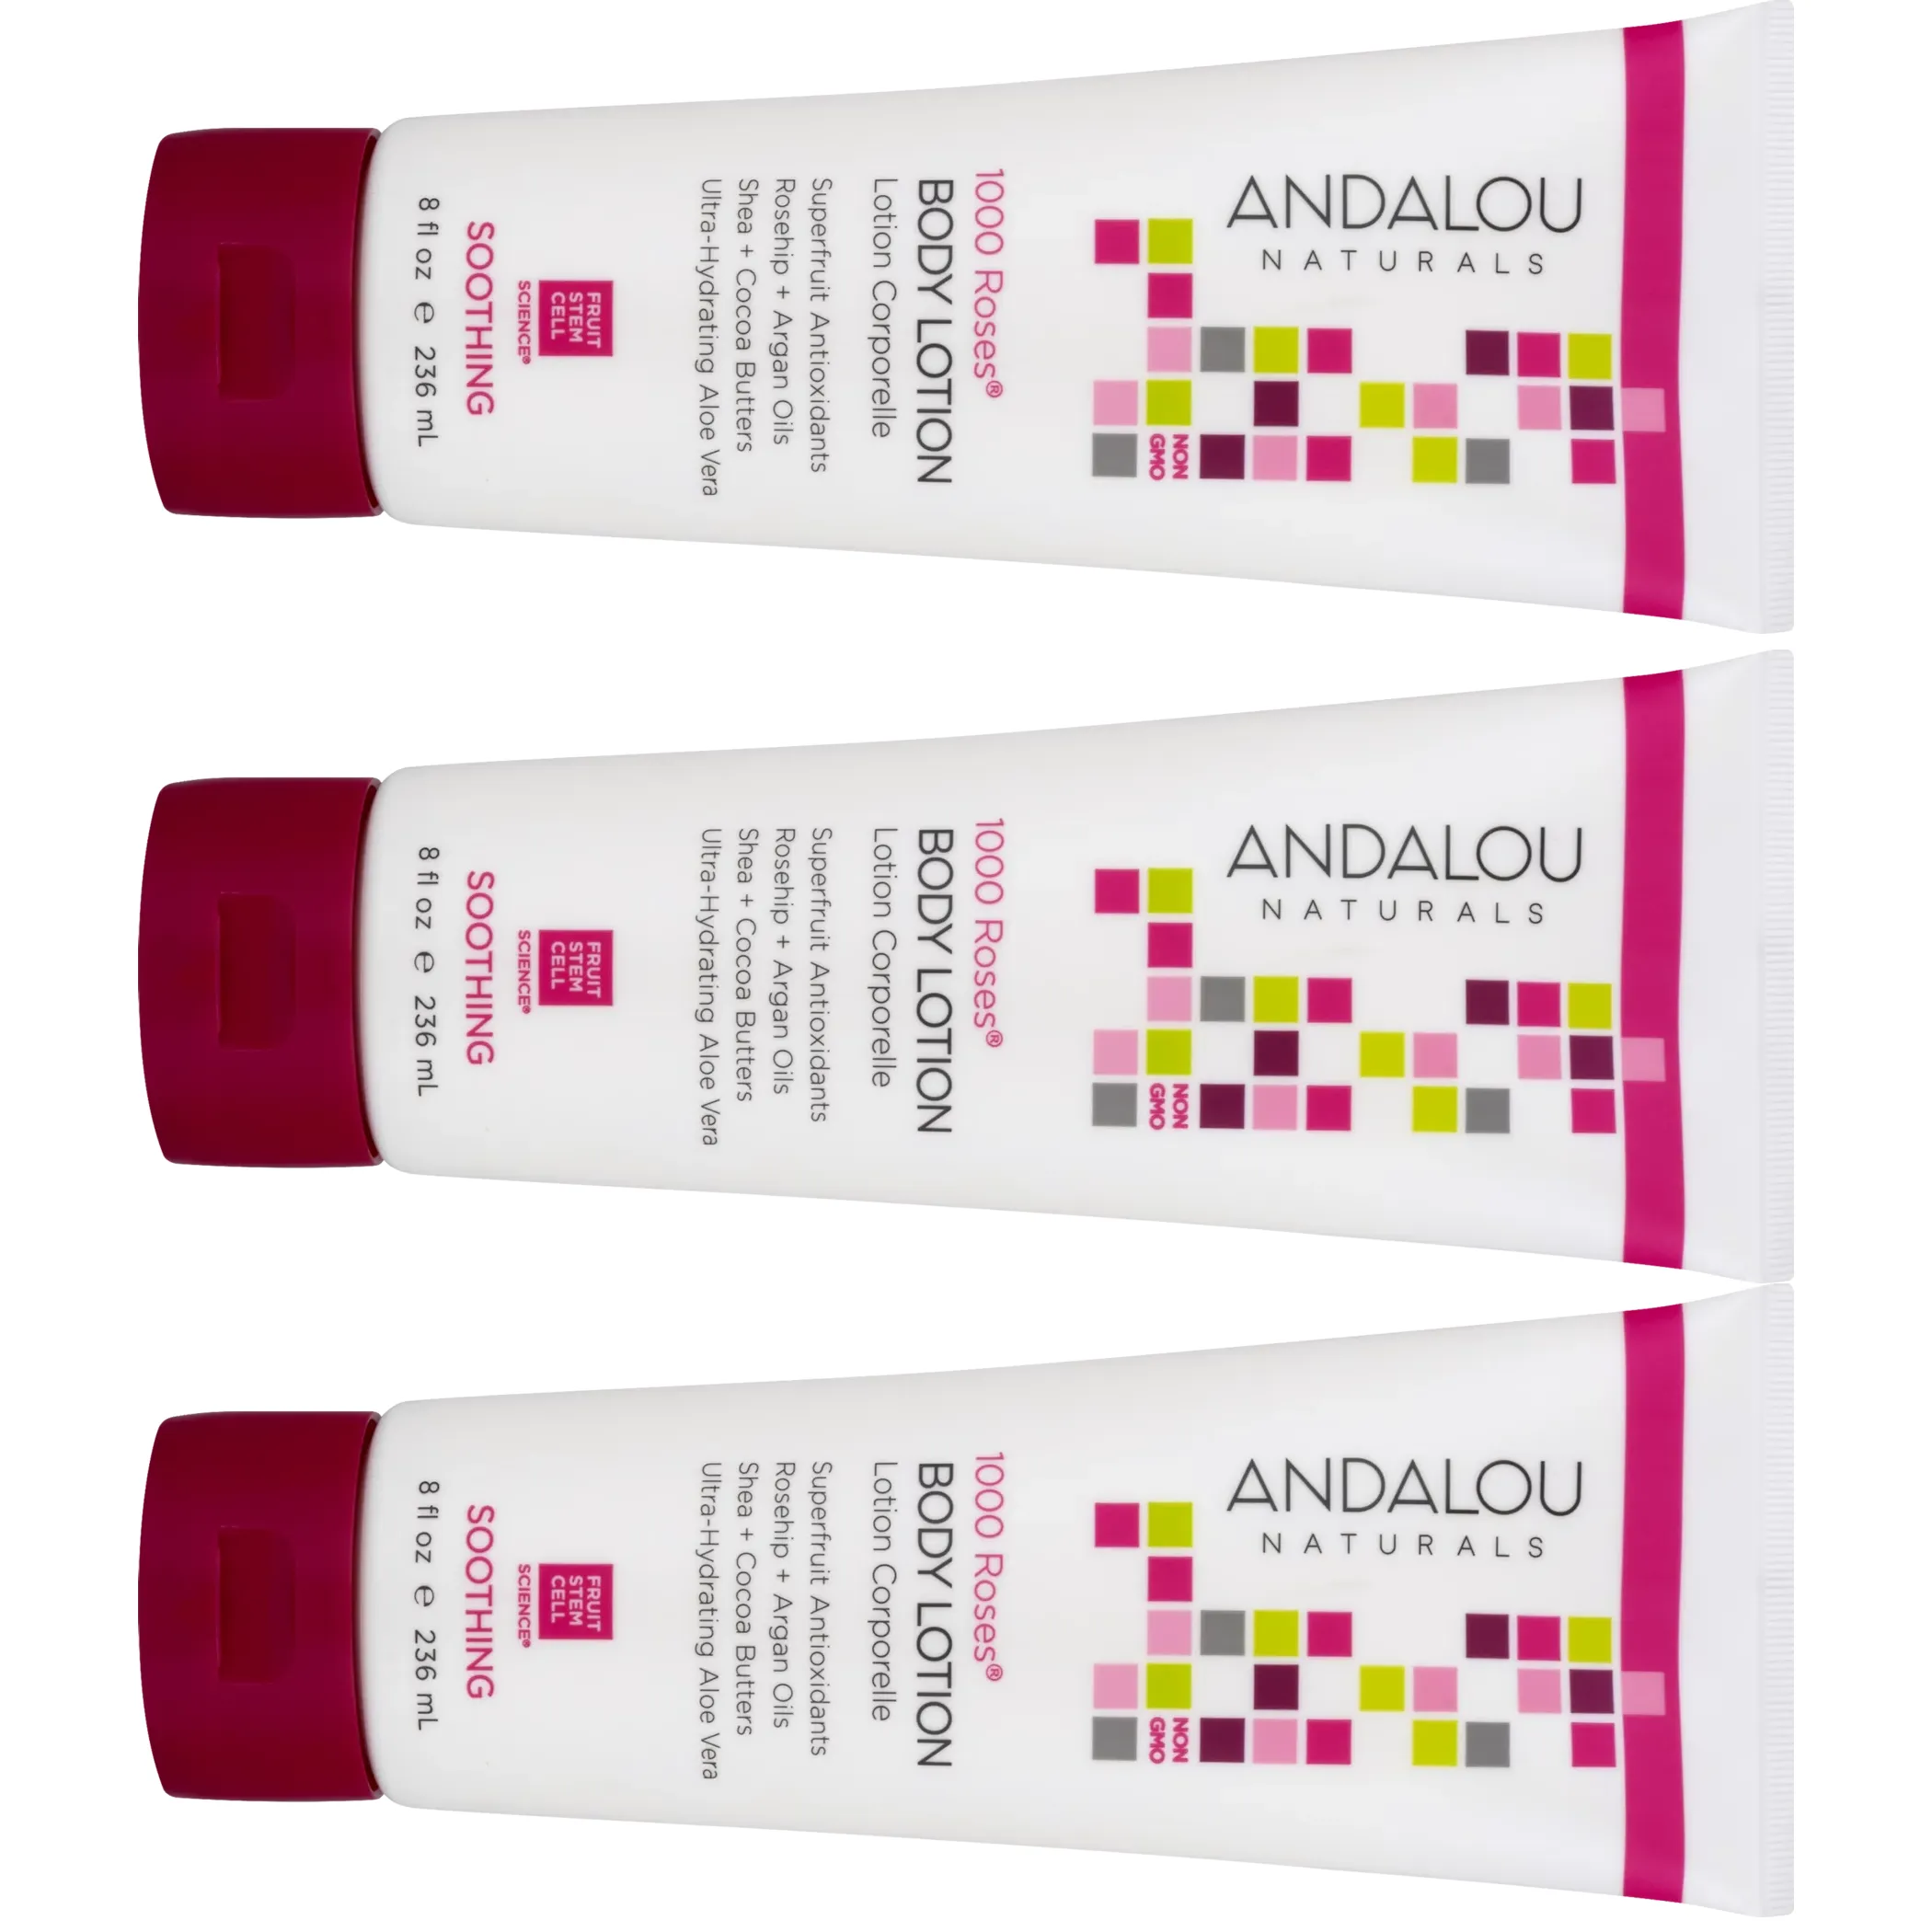 Free Andalou Naturals Skincare Products